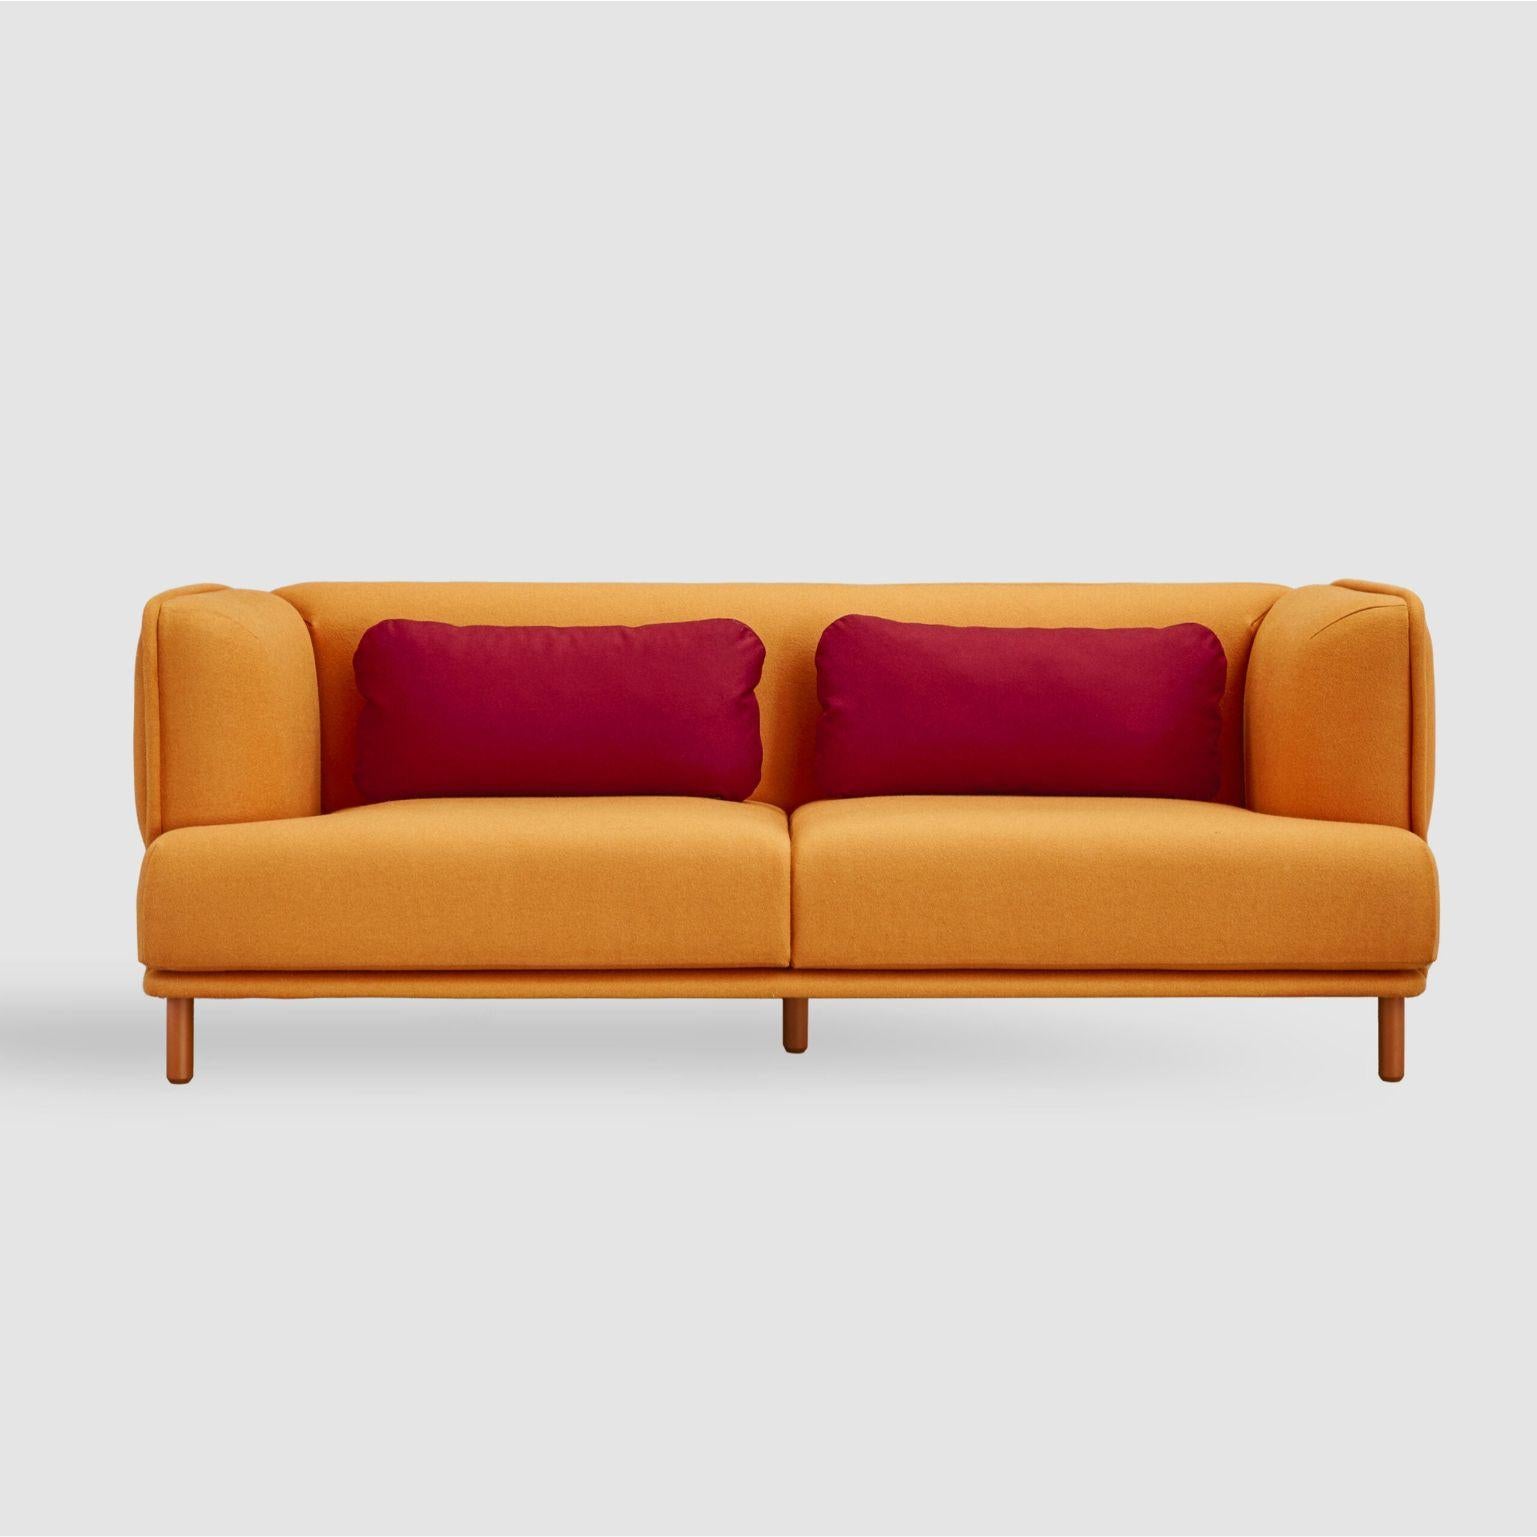 Hug sofa - 3 seaters by Cristian Reyes
Dimensions: W202, D95, H73, Seat43
Materials: Pine wood structure reinforced with plywood and tablex
Backrest is 50% goose feather and 50% polyester fibre
Foam CMHR (high resilience and flame retardant) for